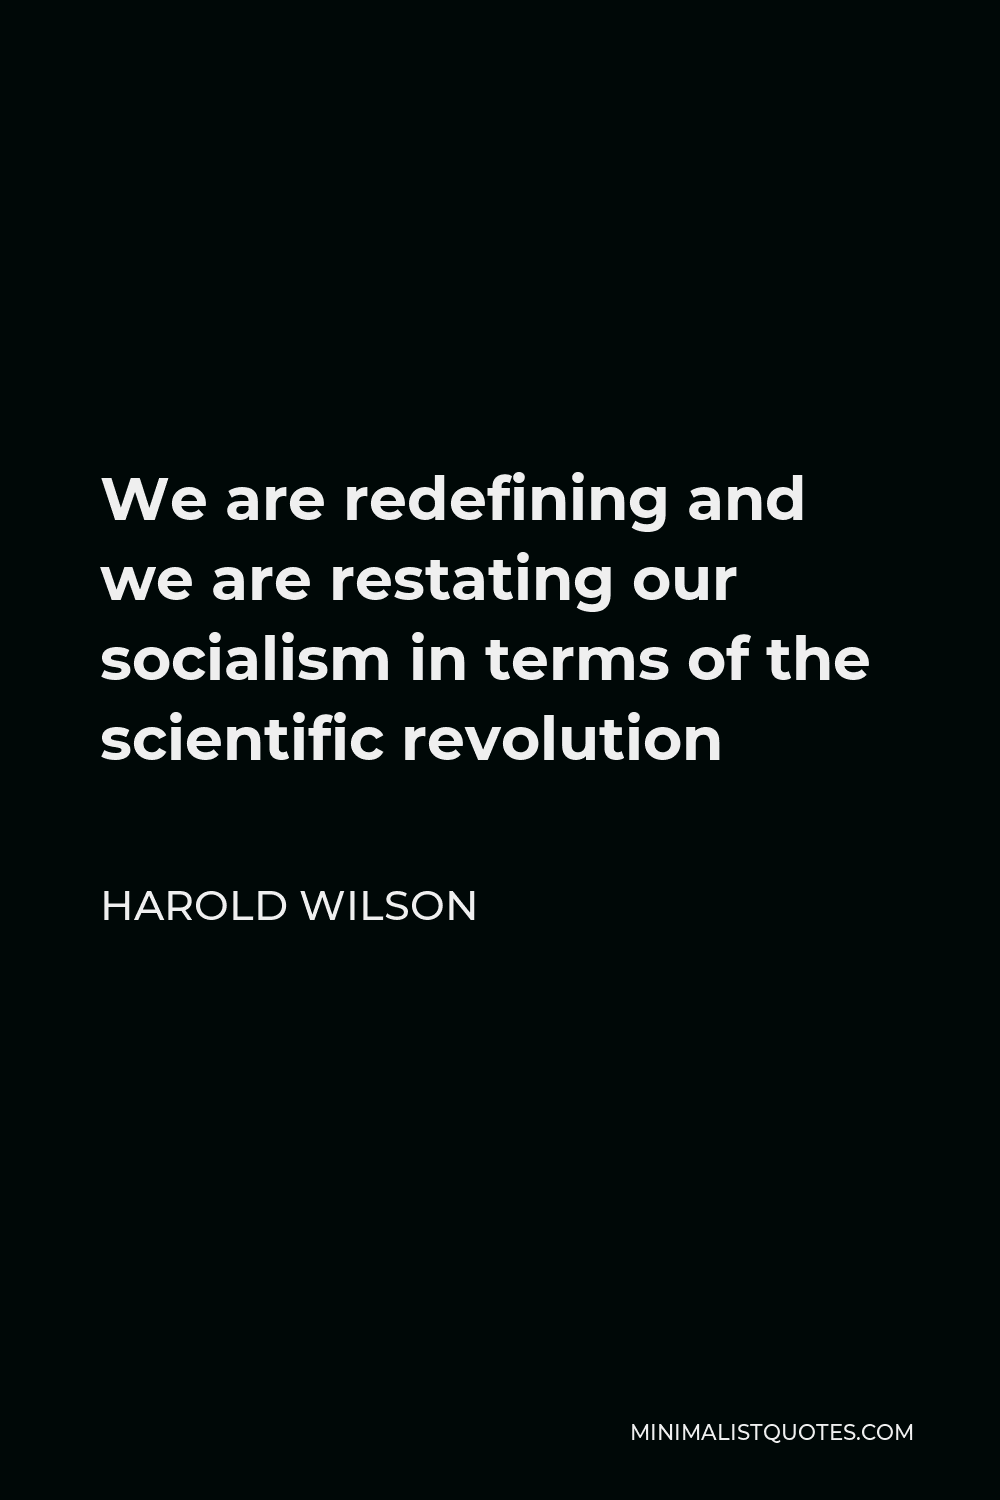 Harold Wilson Quote - We are redefining and we are restating our socialism in terms of the scientific revolution